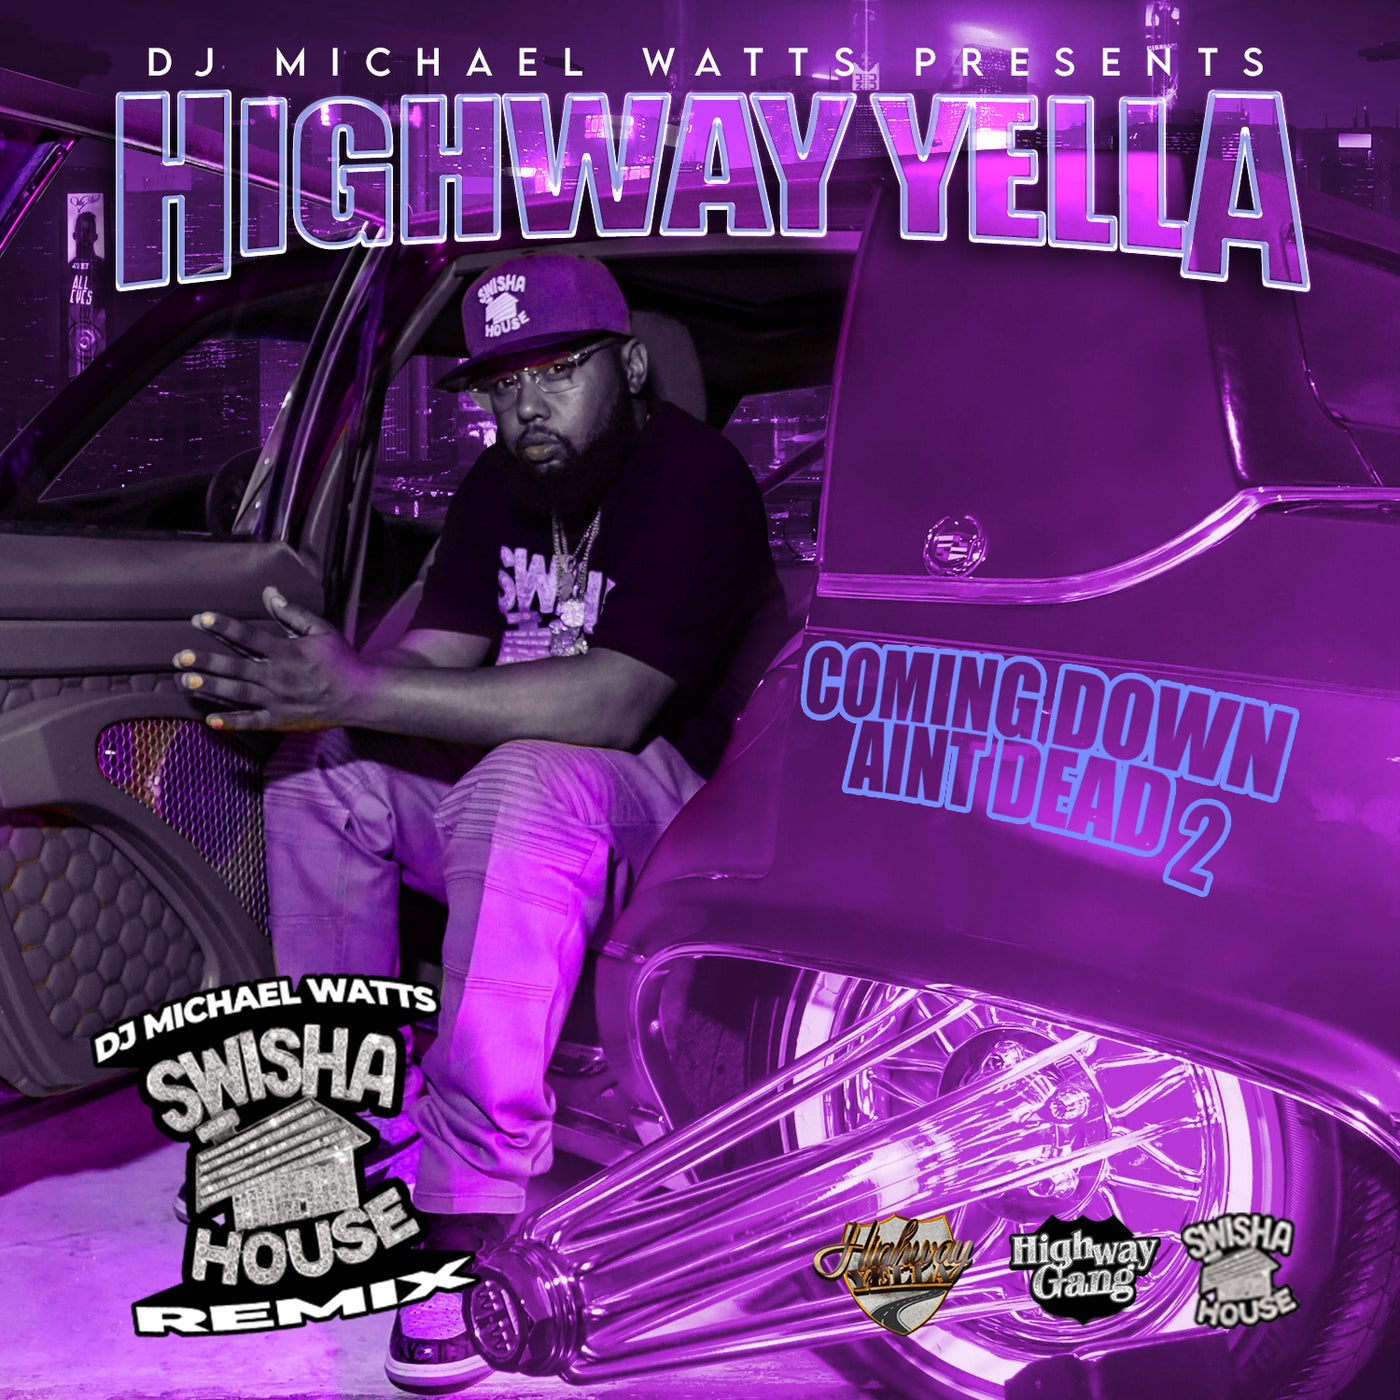 Coming Down Ain't Dead 2 (Swishahouse Remix) by Highway Yella on 